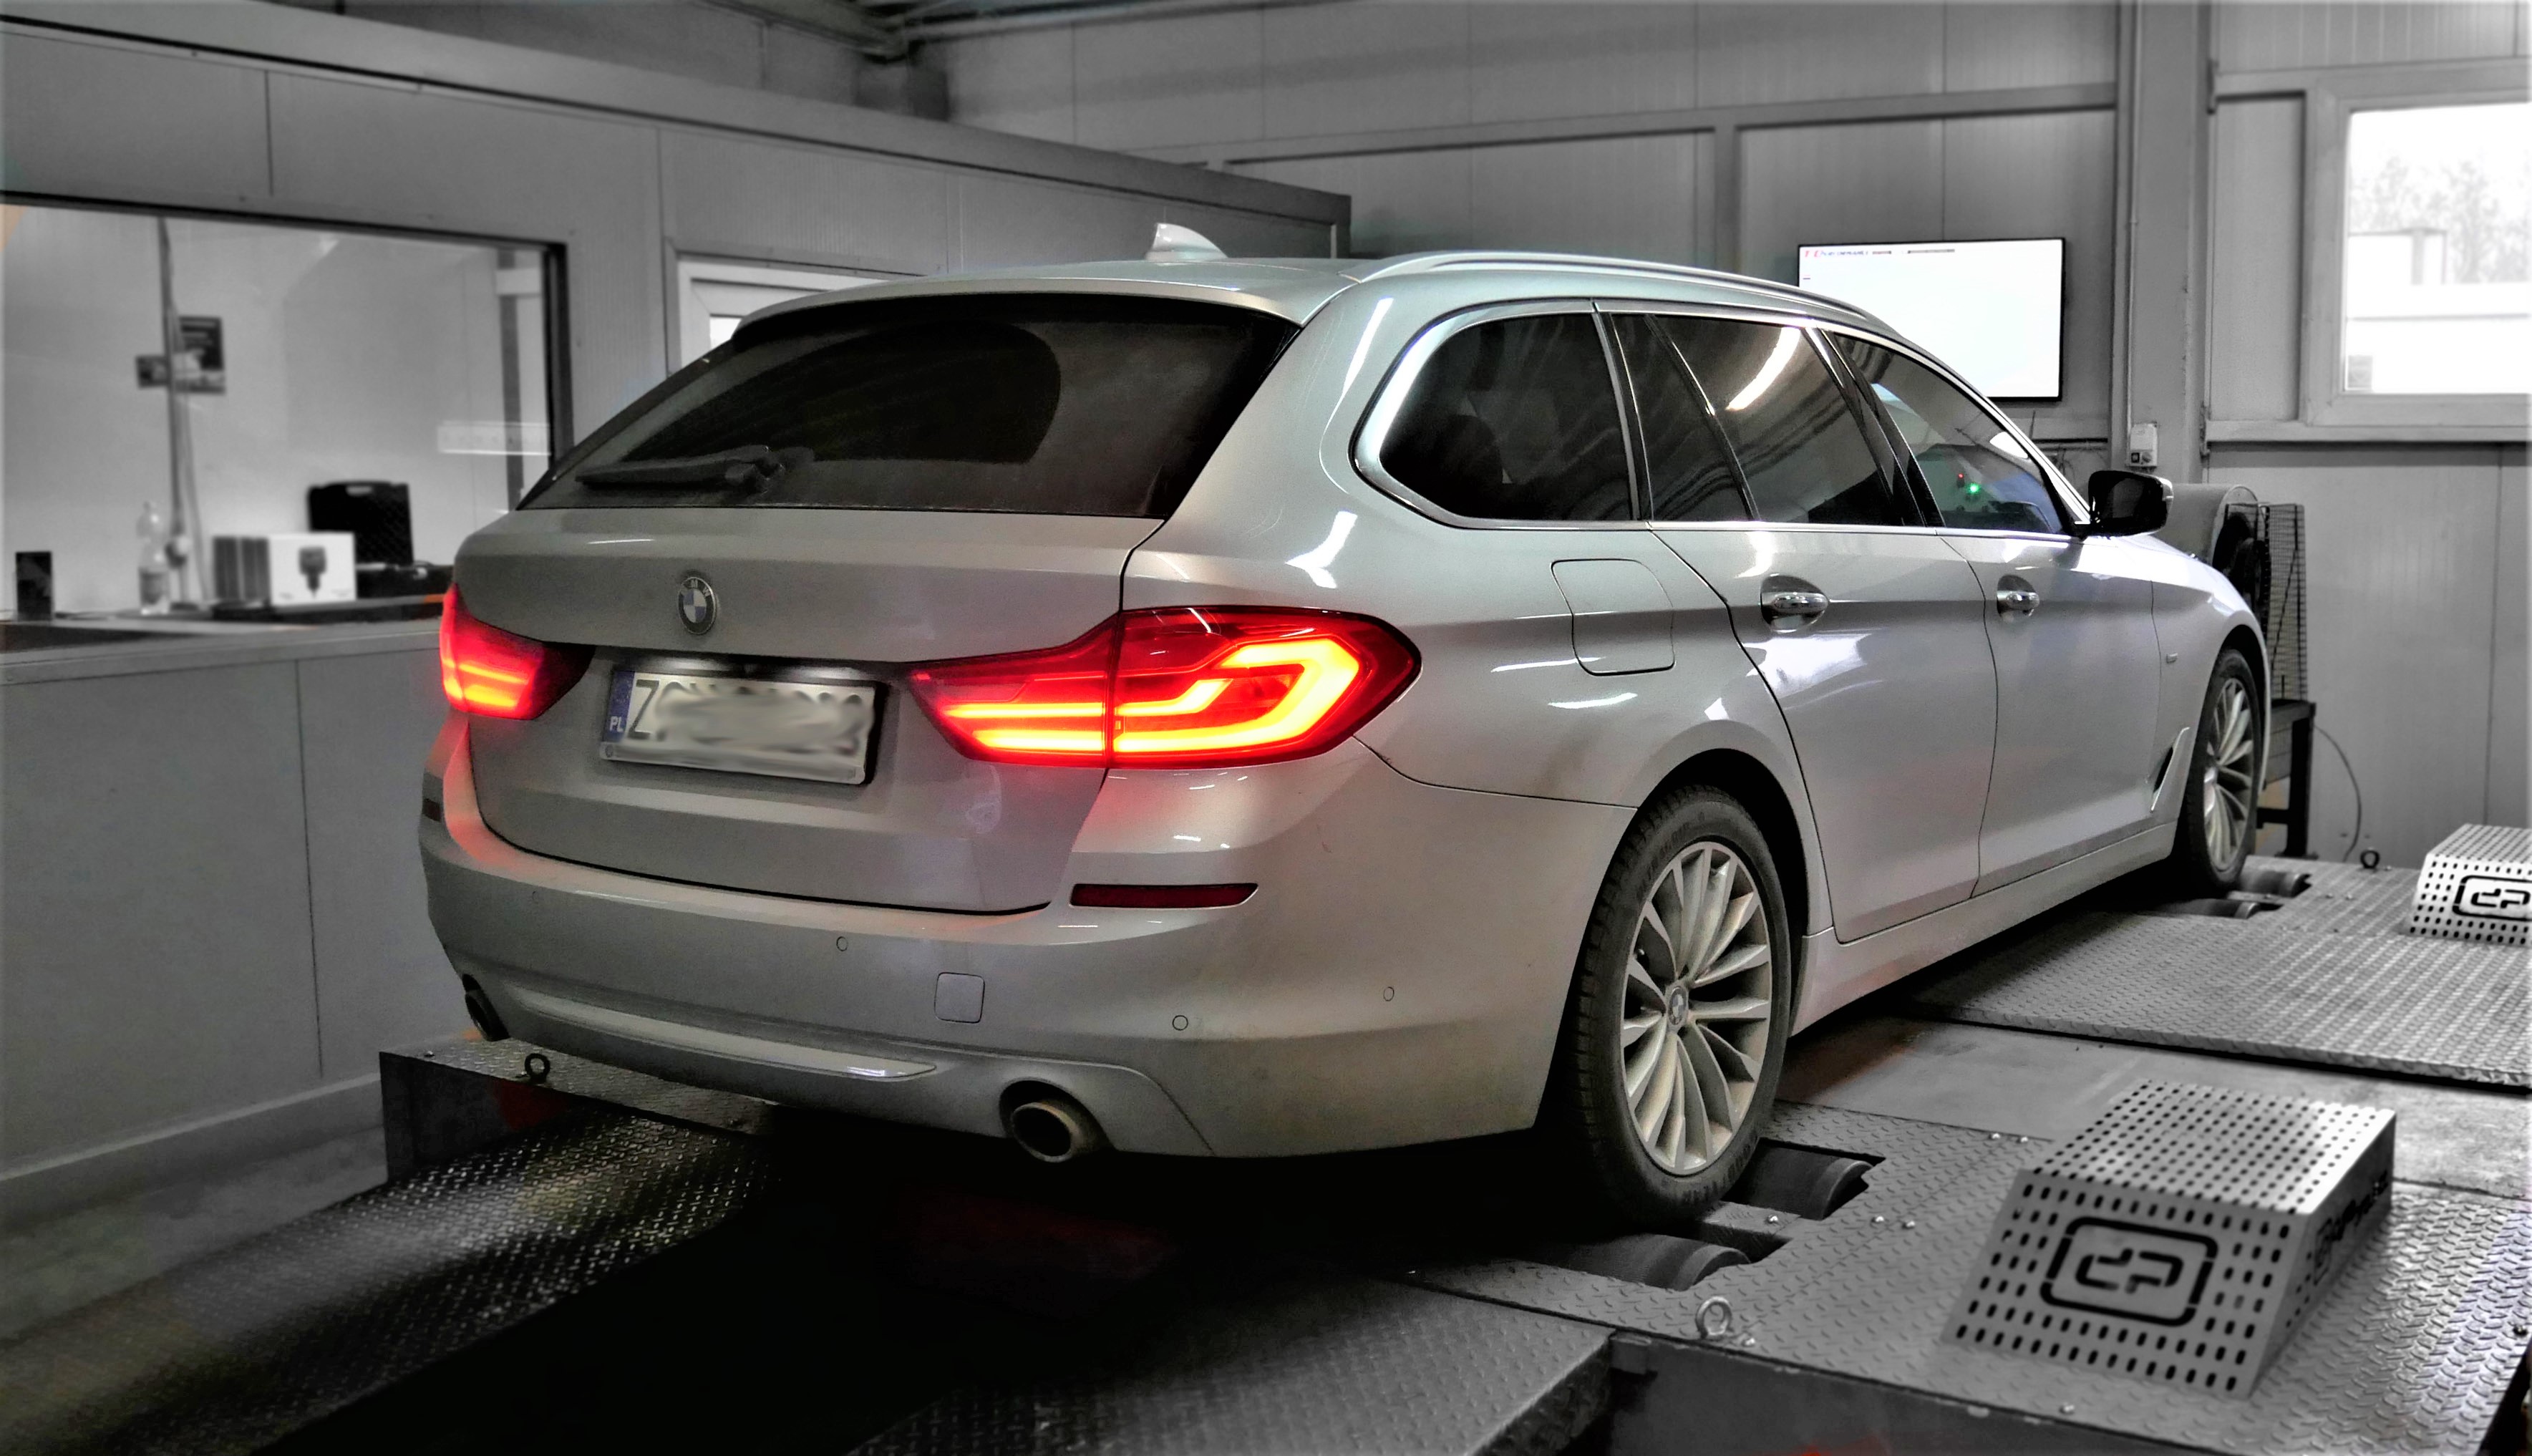 NET Galerie Car Tuning - BMW 530xd Touring (G31) - Chiptuning BMW 1-8